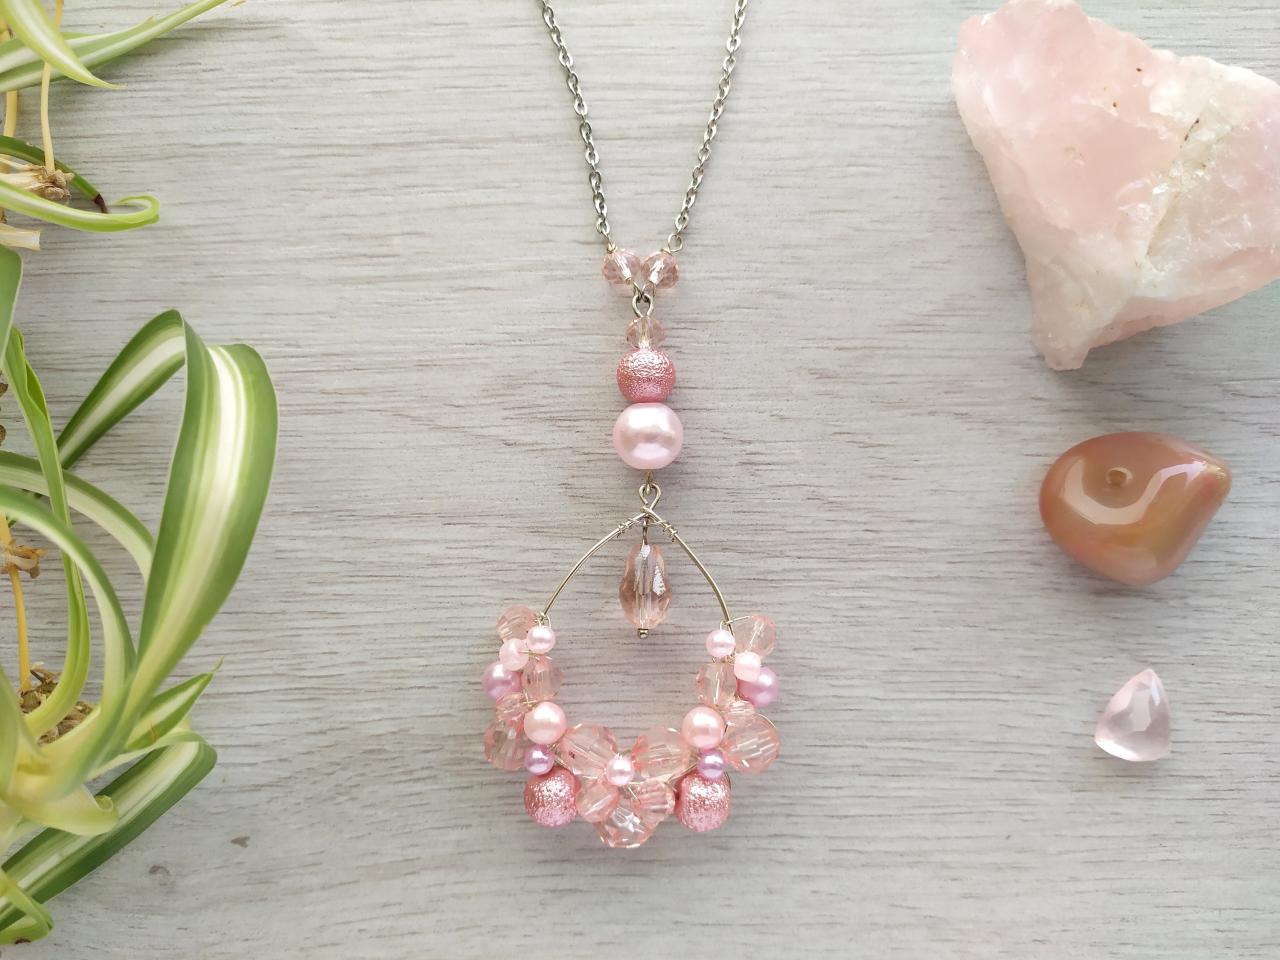 Pink Beaded Necklace, Long Necklace With Pink Pendant, Wire Wrapped Jewelry, Statement Bohemian Necklace, Light Pink Boho Necklace